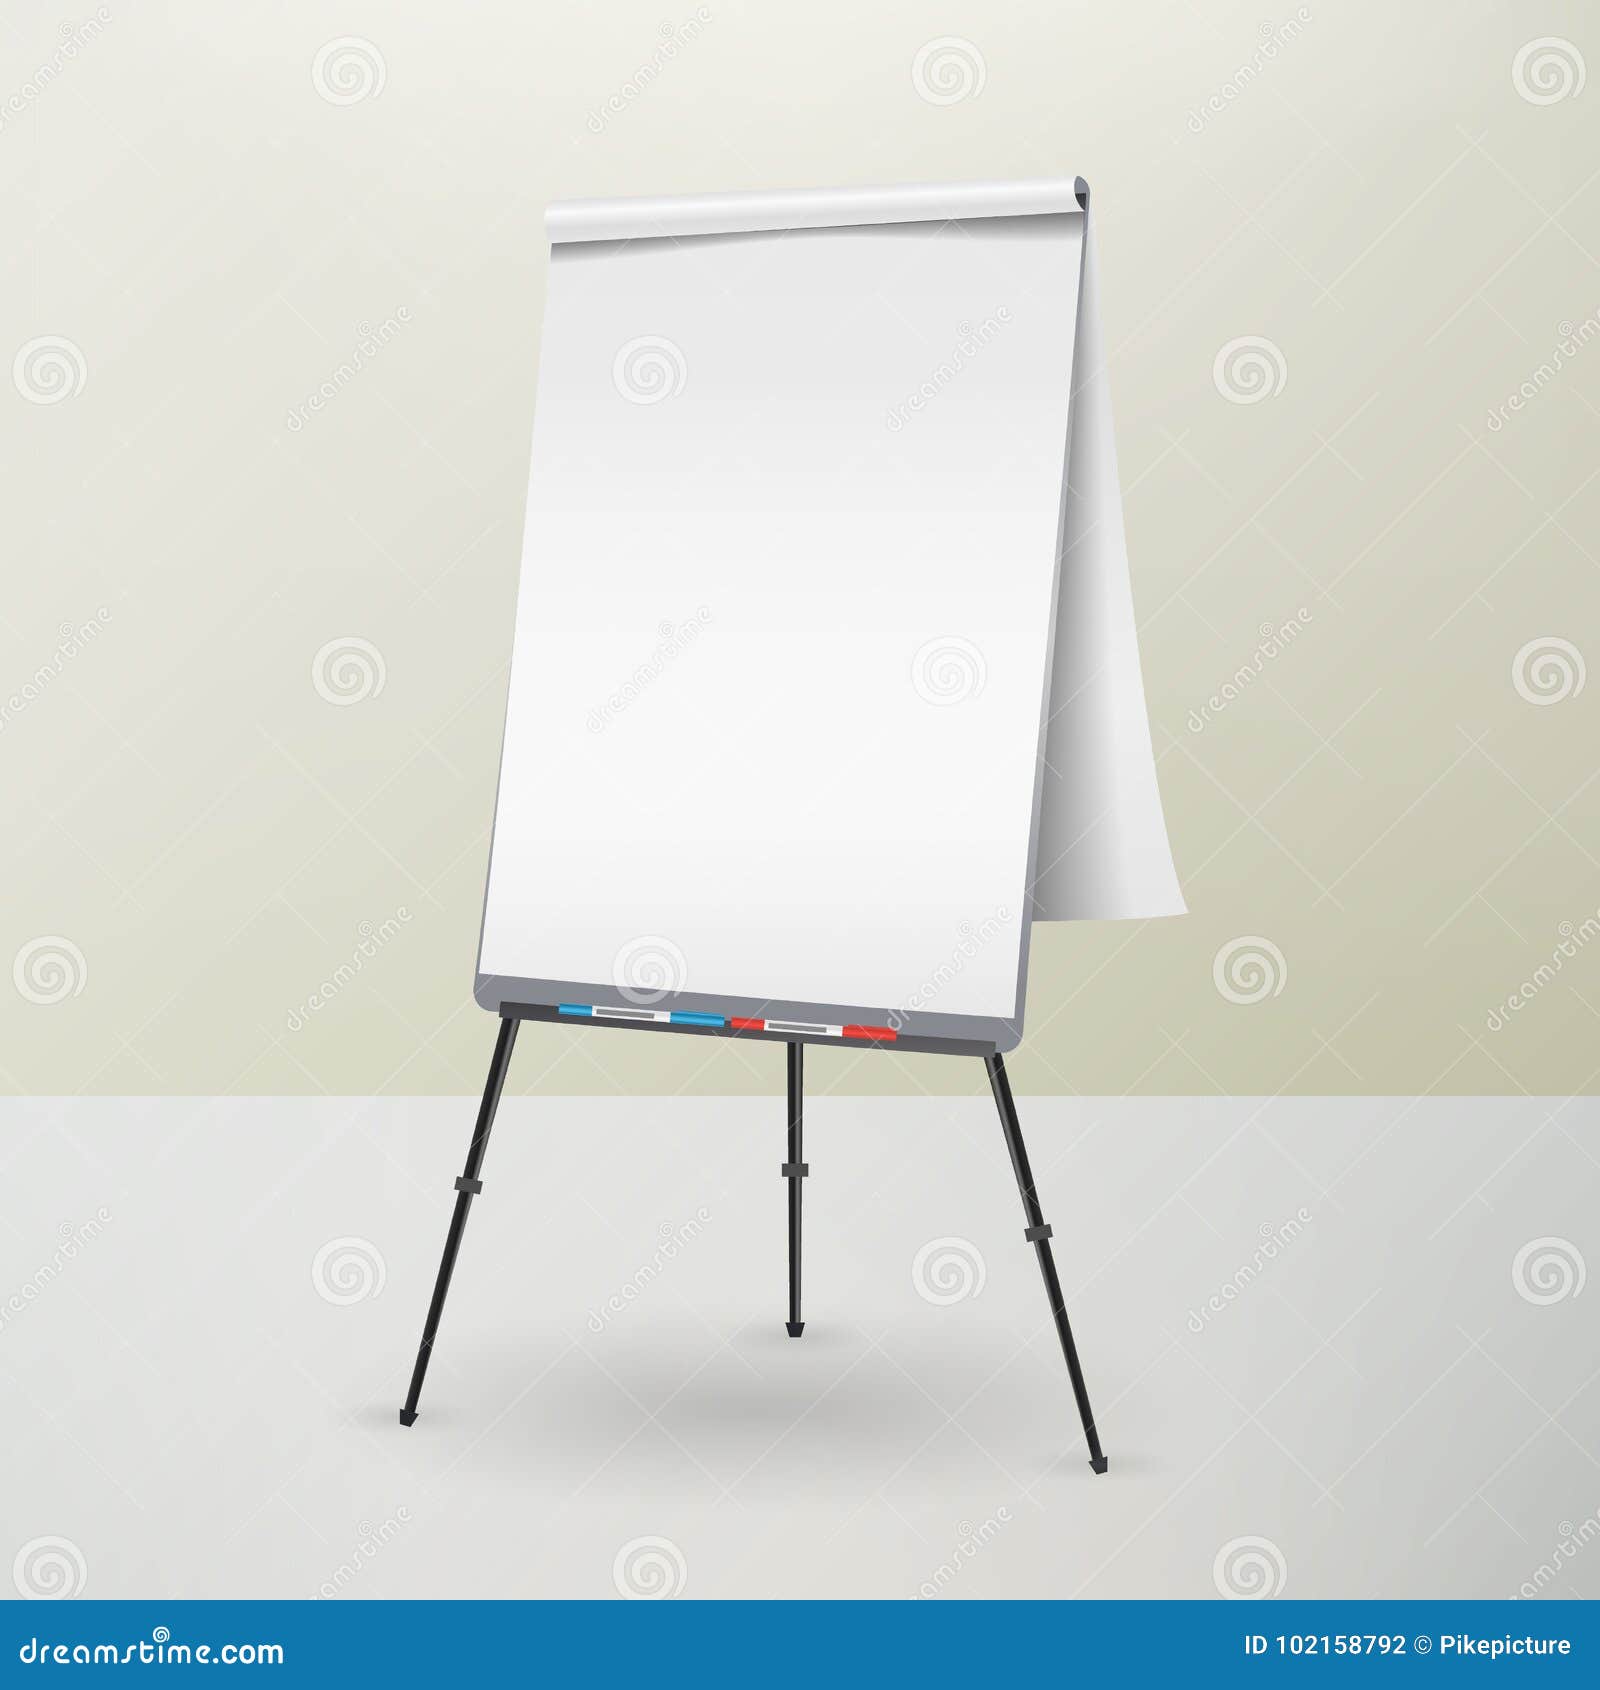 Flip Chart Vector. Blank Sheet of Paper on a Tripod. Isolated Illustration  Stock Vector - Illustration of business, page: 102158792